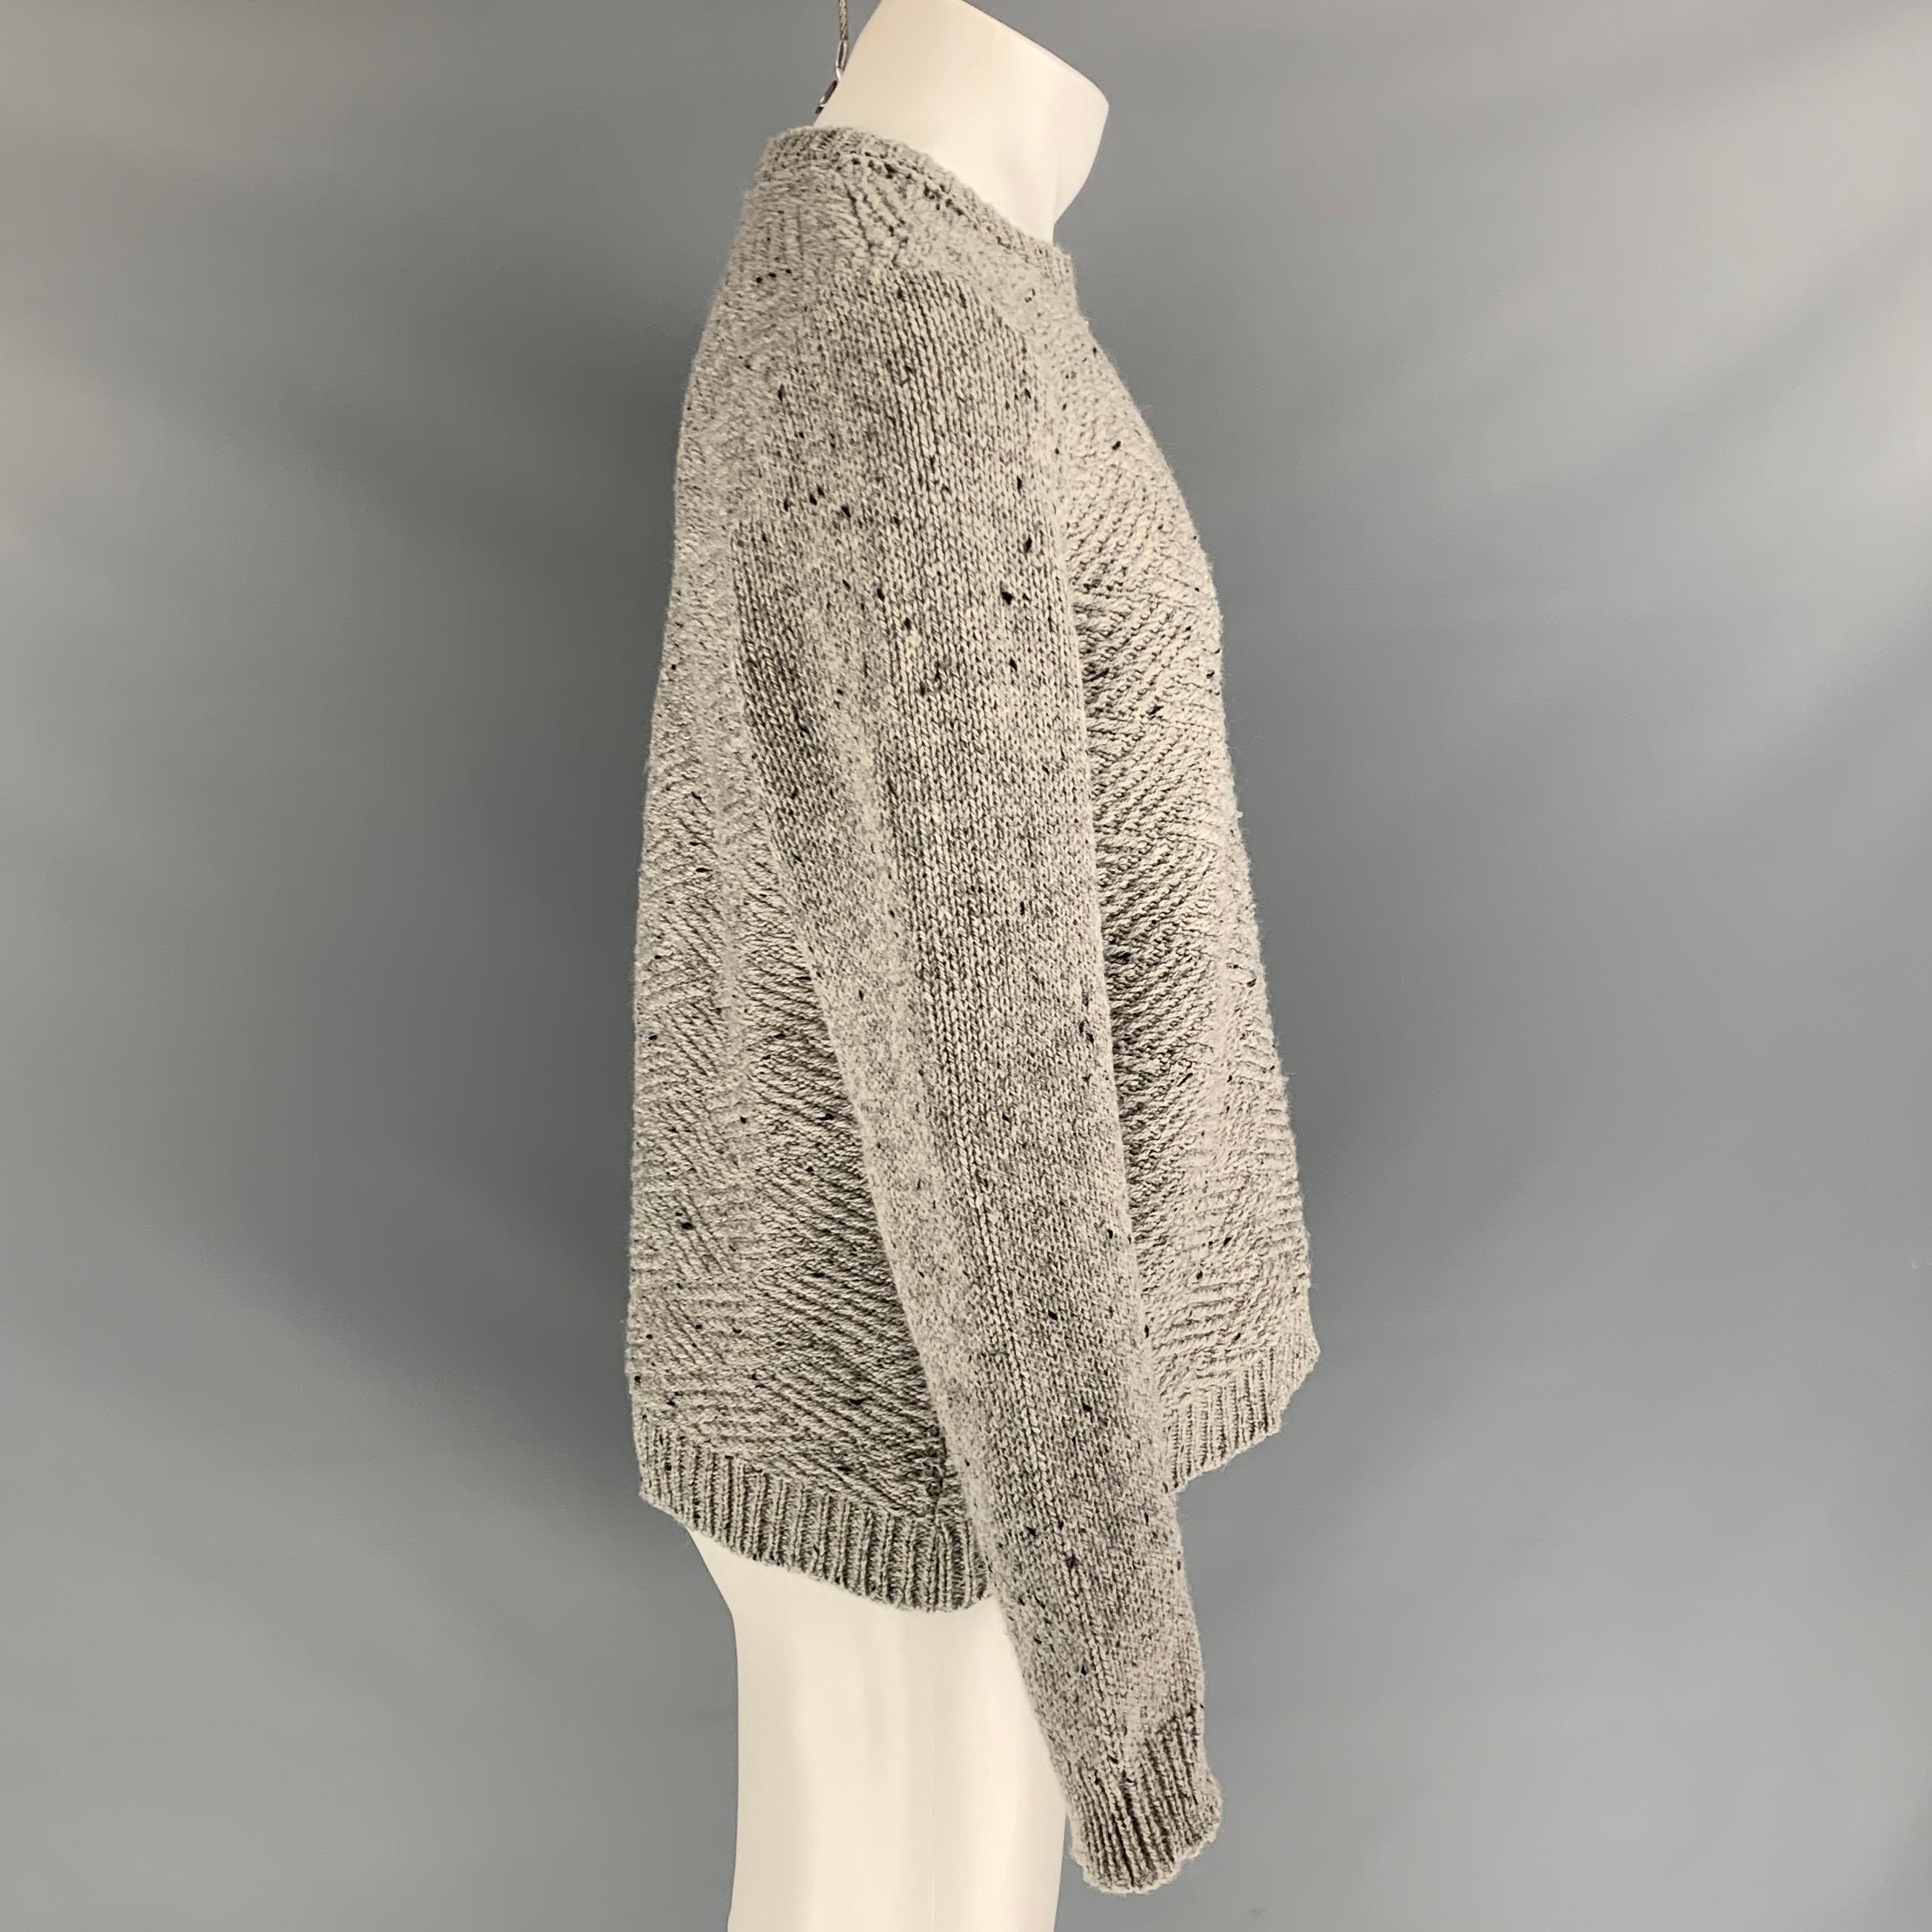 FRANK LEDER sweater comes in a grey knitted wool featuring long sleeves and a crew-neck. 

Very Good Pre-Owned Condition.
Marked: L

Measurements:

Shoulder: 18 in.
Chest: 44 in.
Sleeve: 28 in.
Length: 26 in. 